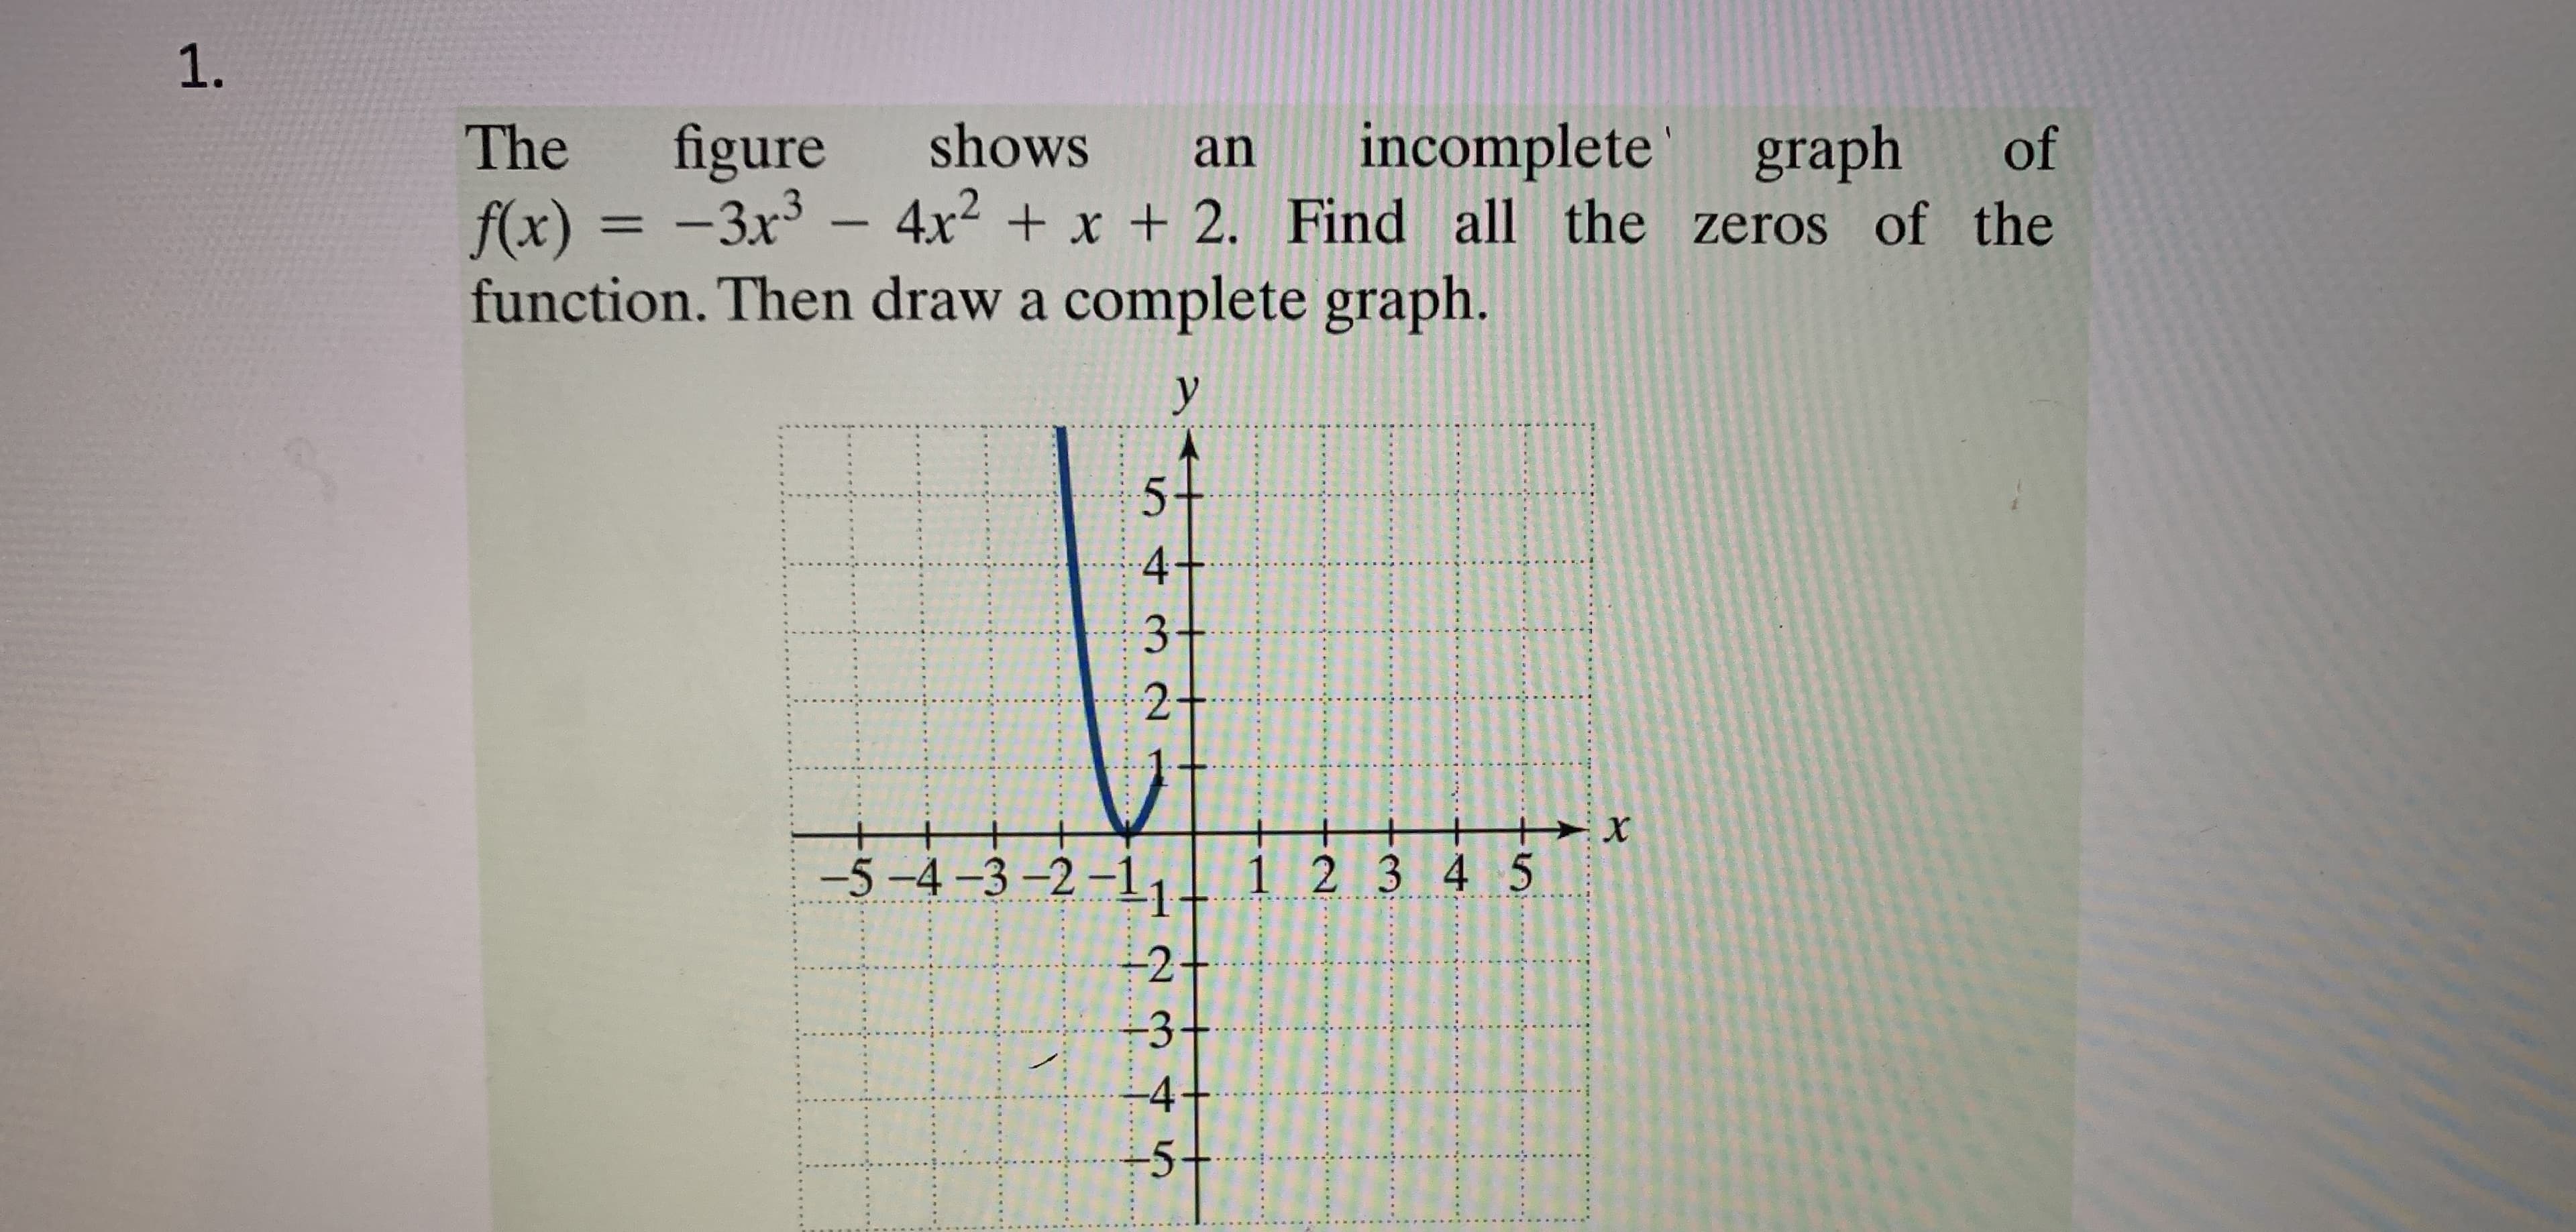 The
figure
shows
incomplete' graph
of
an
f(x) = -3x - 4x2 + x + 2. Find all the zeros of the
function. Then draw a complete graph.
%3D
